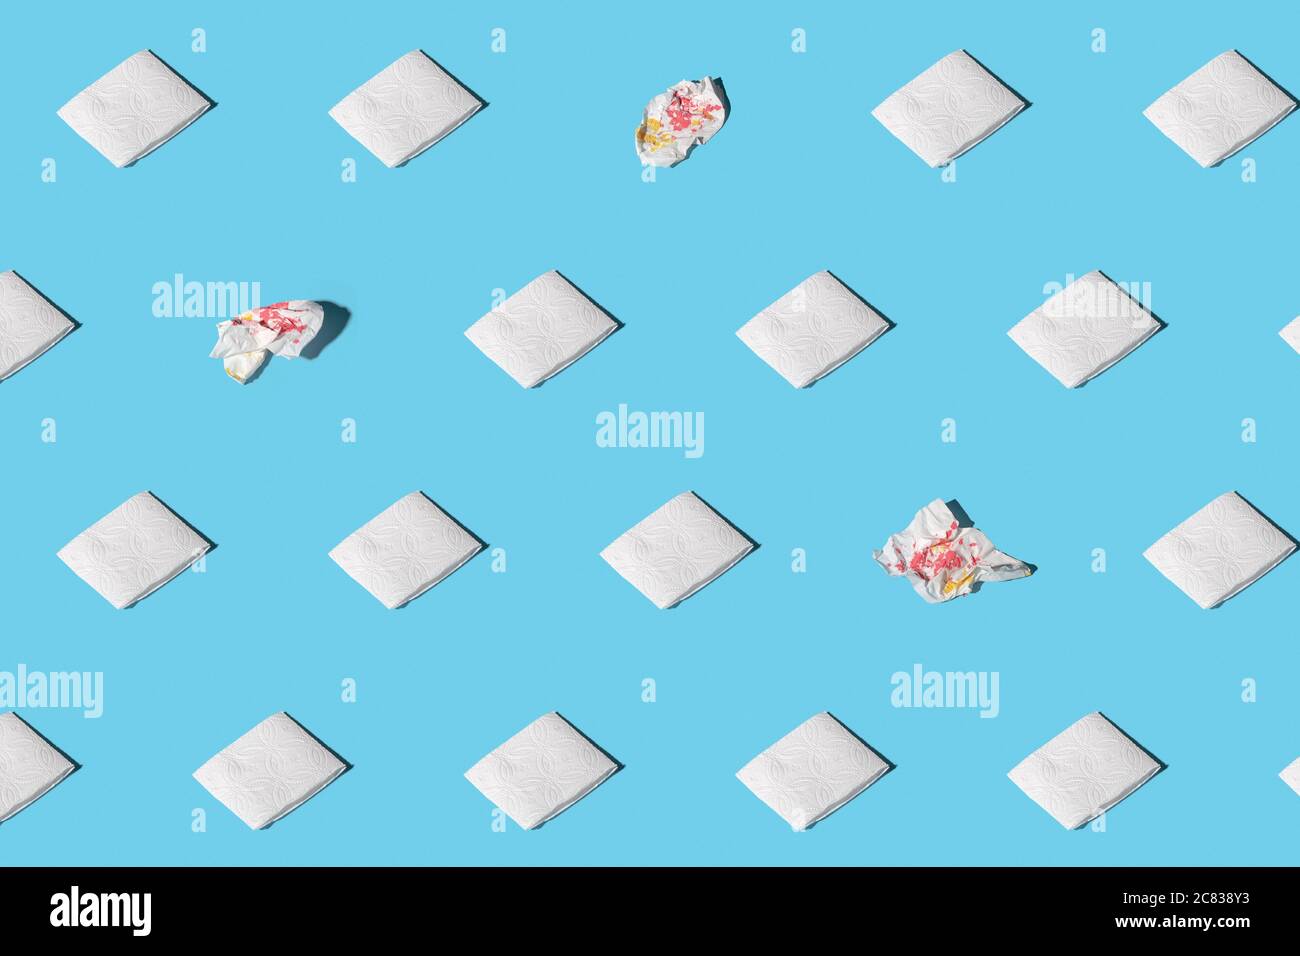 Trendy pattern from clean and used napkins. Concept of exclusiveness, uniqueness. Paper towels with soft shadow. Isometric pattern on blue background Stock Photo